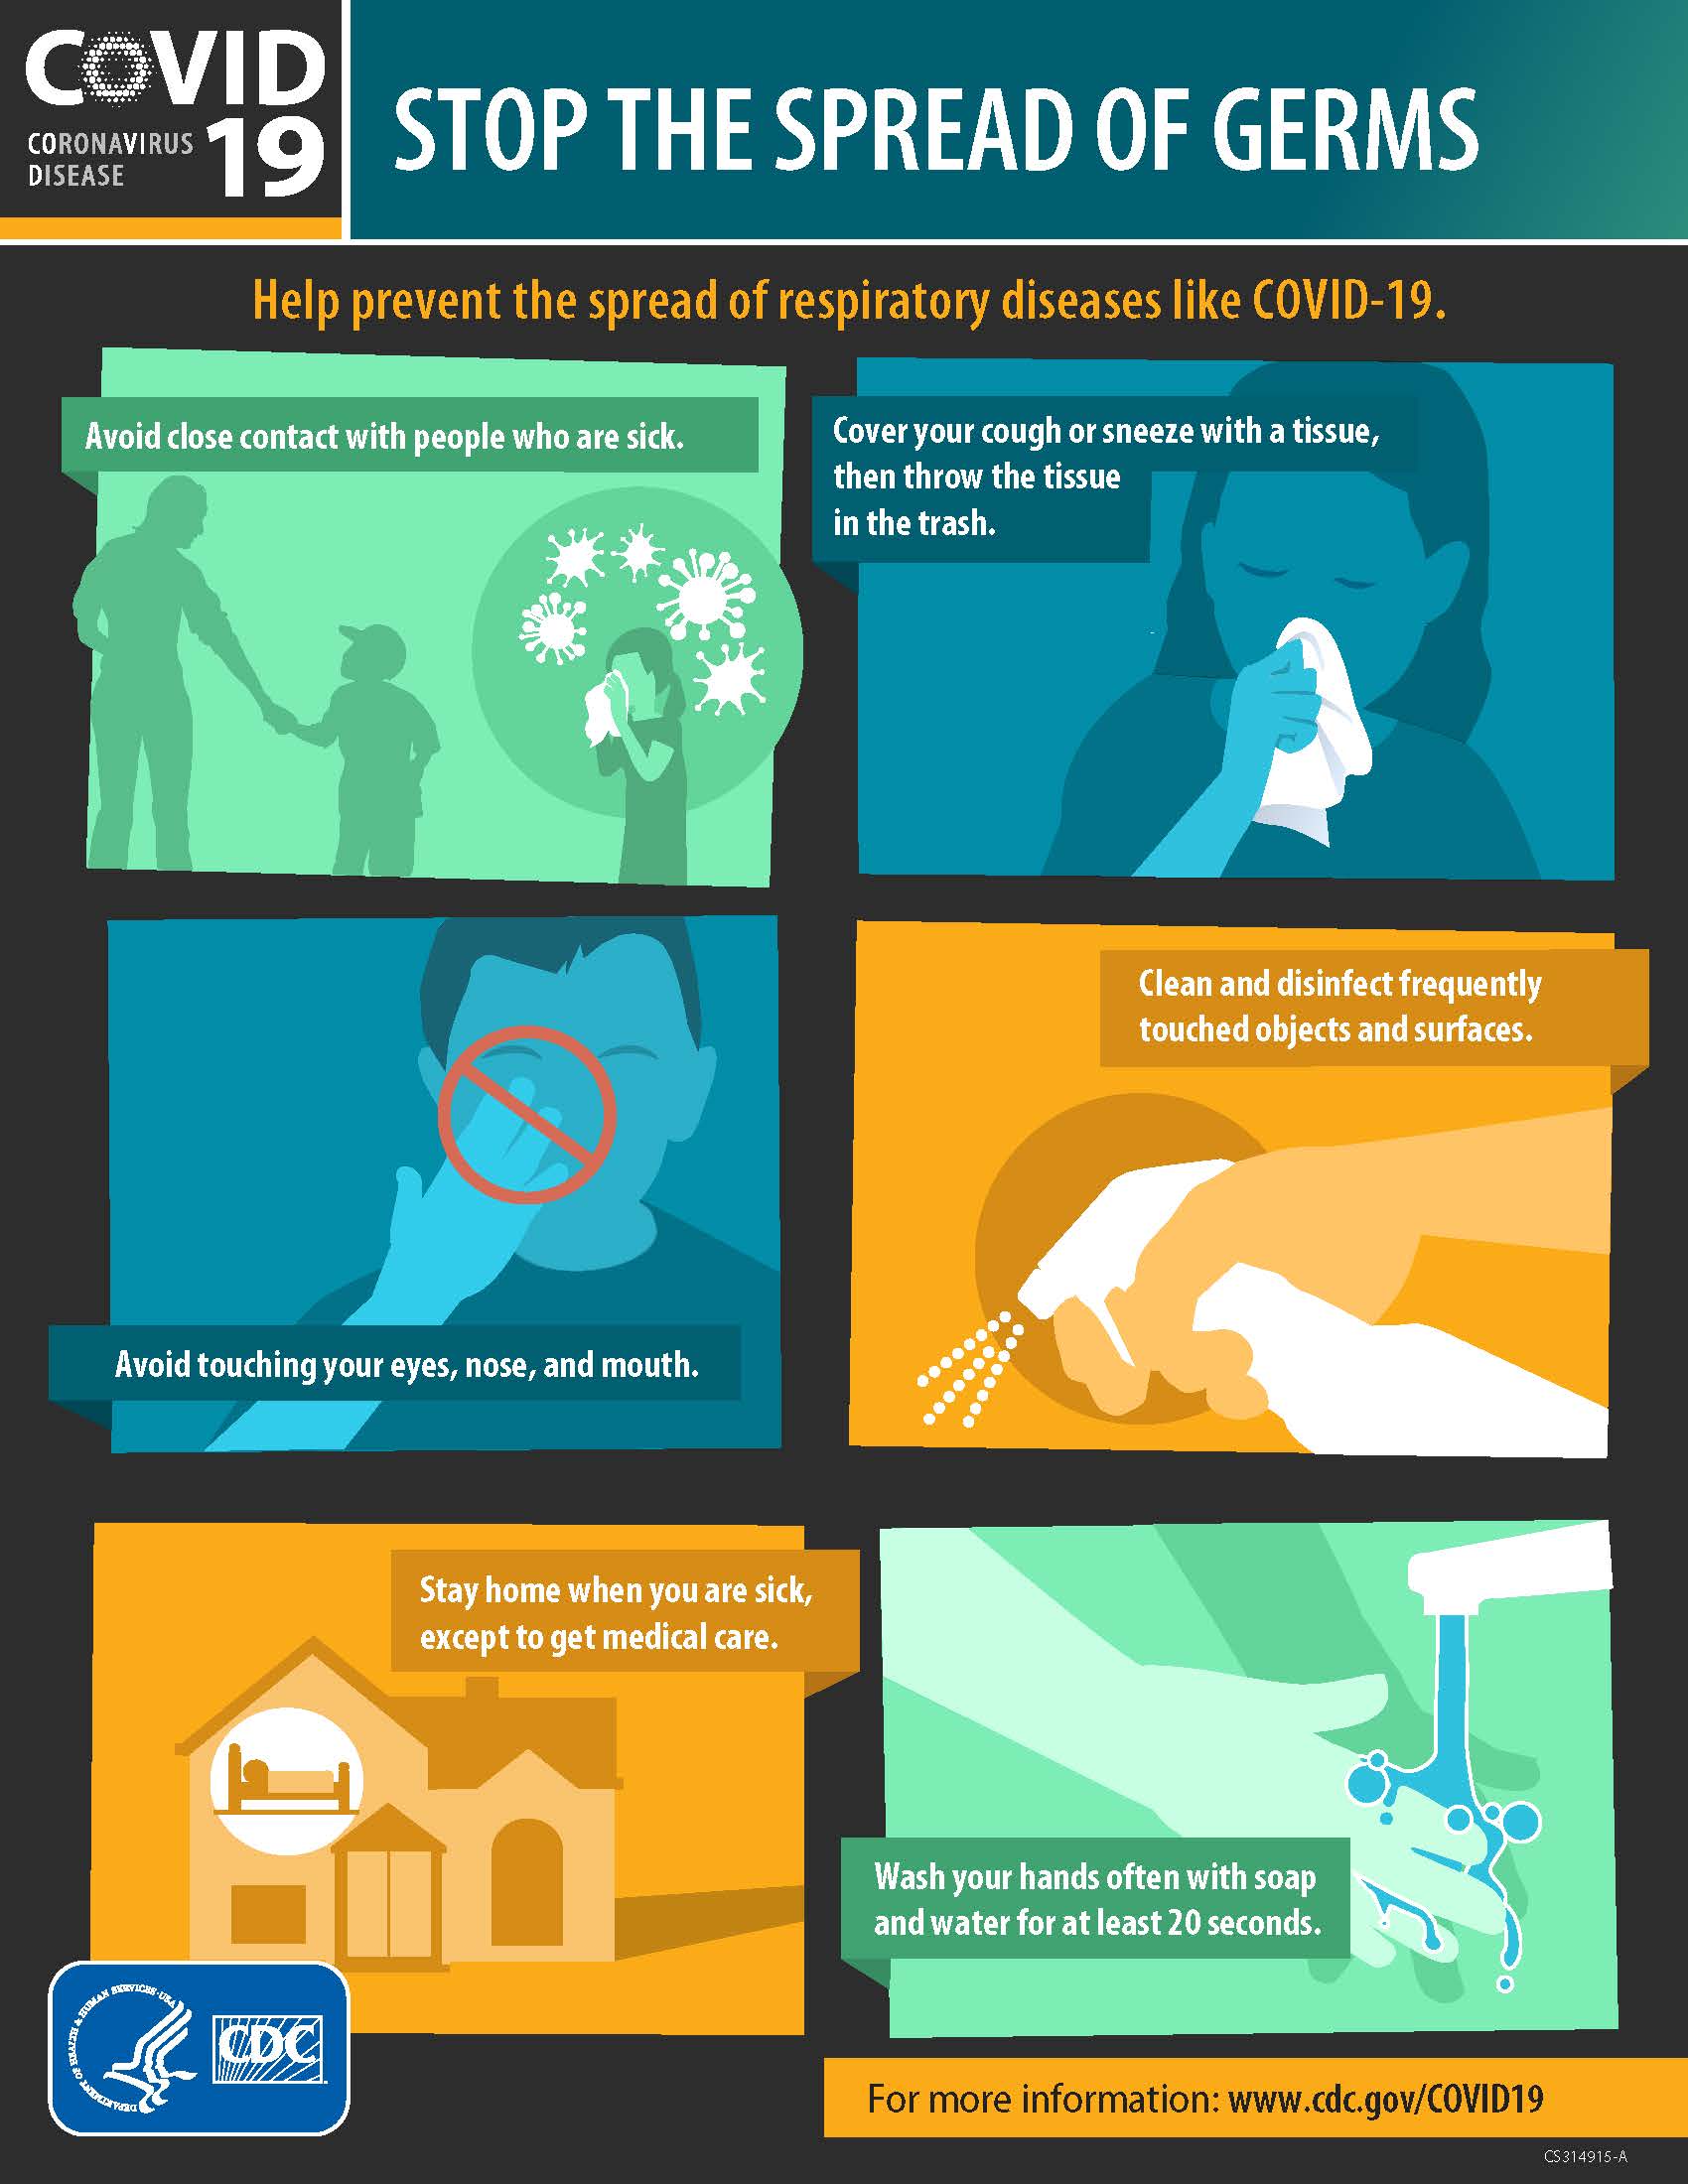 Image - CDC Stop the Spread of Germs